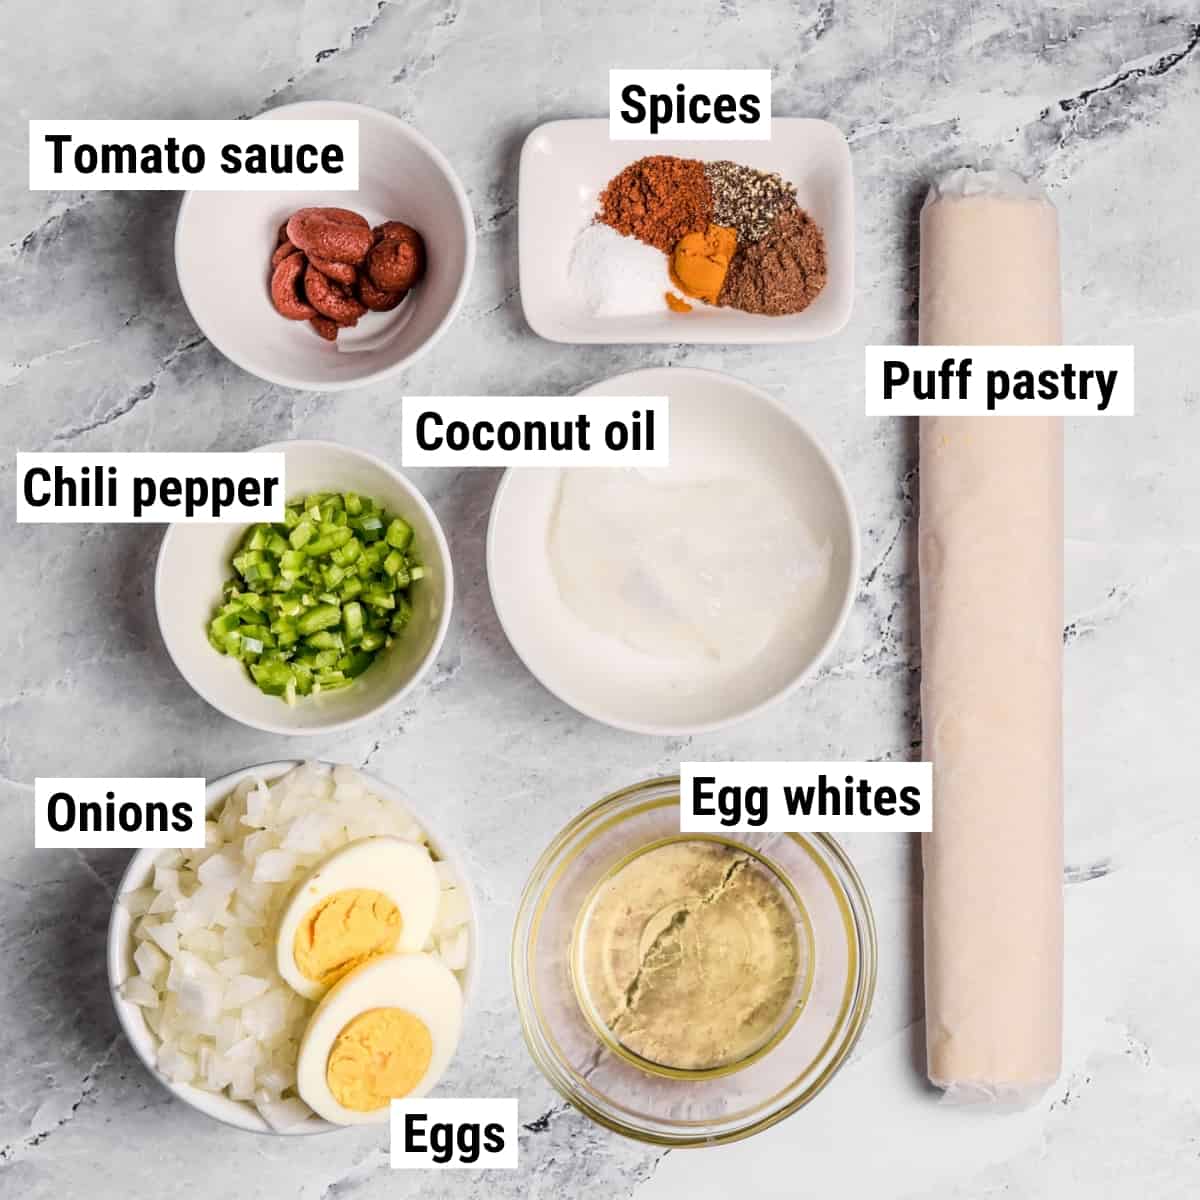 The ingredients used to make egg puffs spread out on a table.